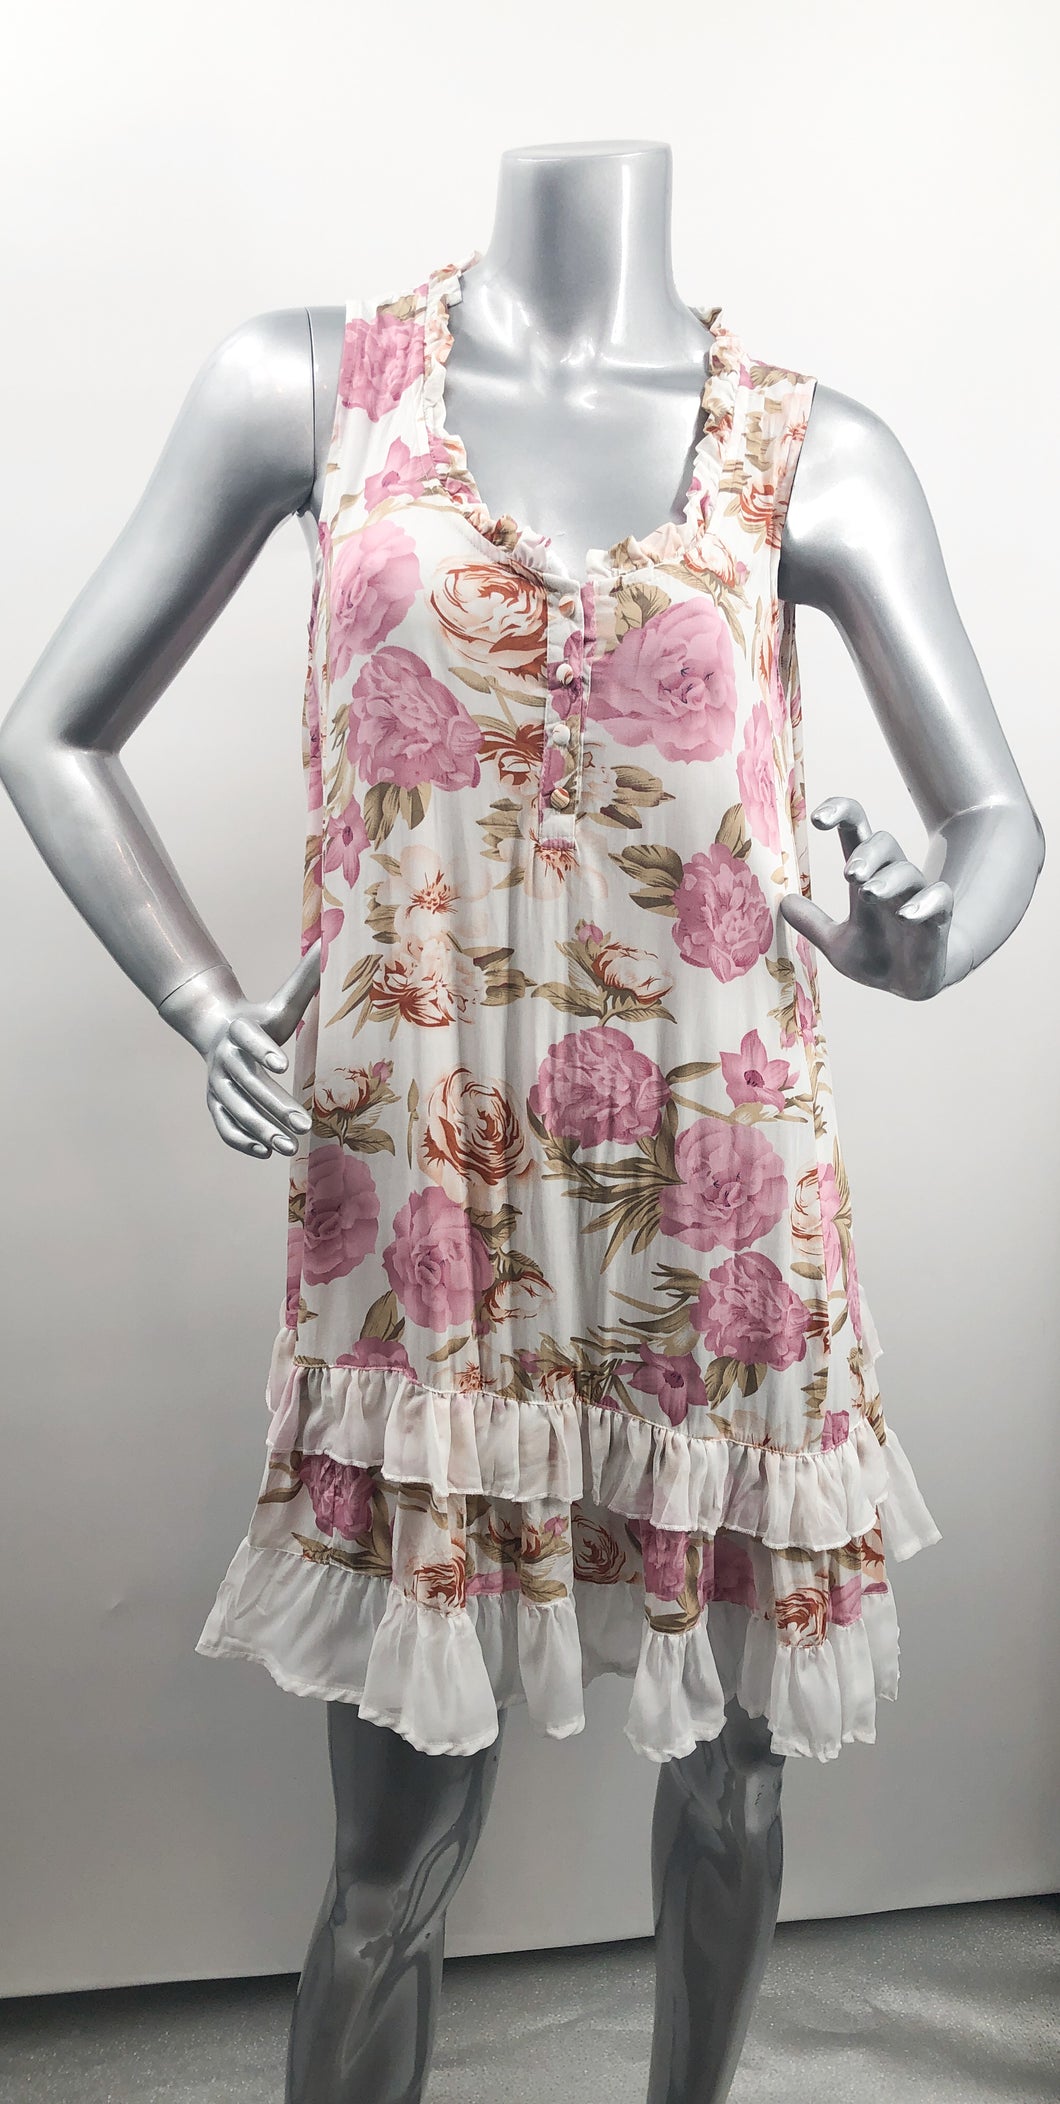 If you are looking for a summer dress that can be worn for many occasions, our Polly Pink Floral Two-Tiered White Ruffle Hem Dress is the one!  A beautiful pink and light olive-green floral pattern on a white background creates a feminine flair while the two-tiered hem with white ruffles creates a fashionable look.  